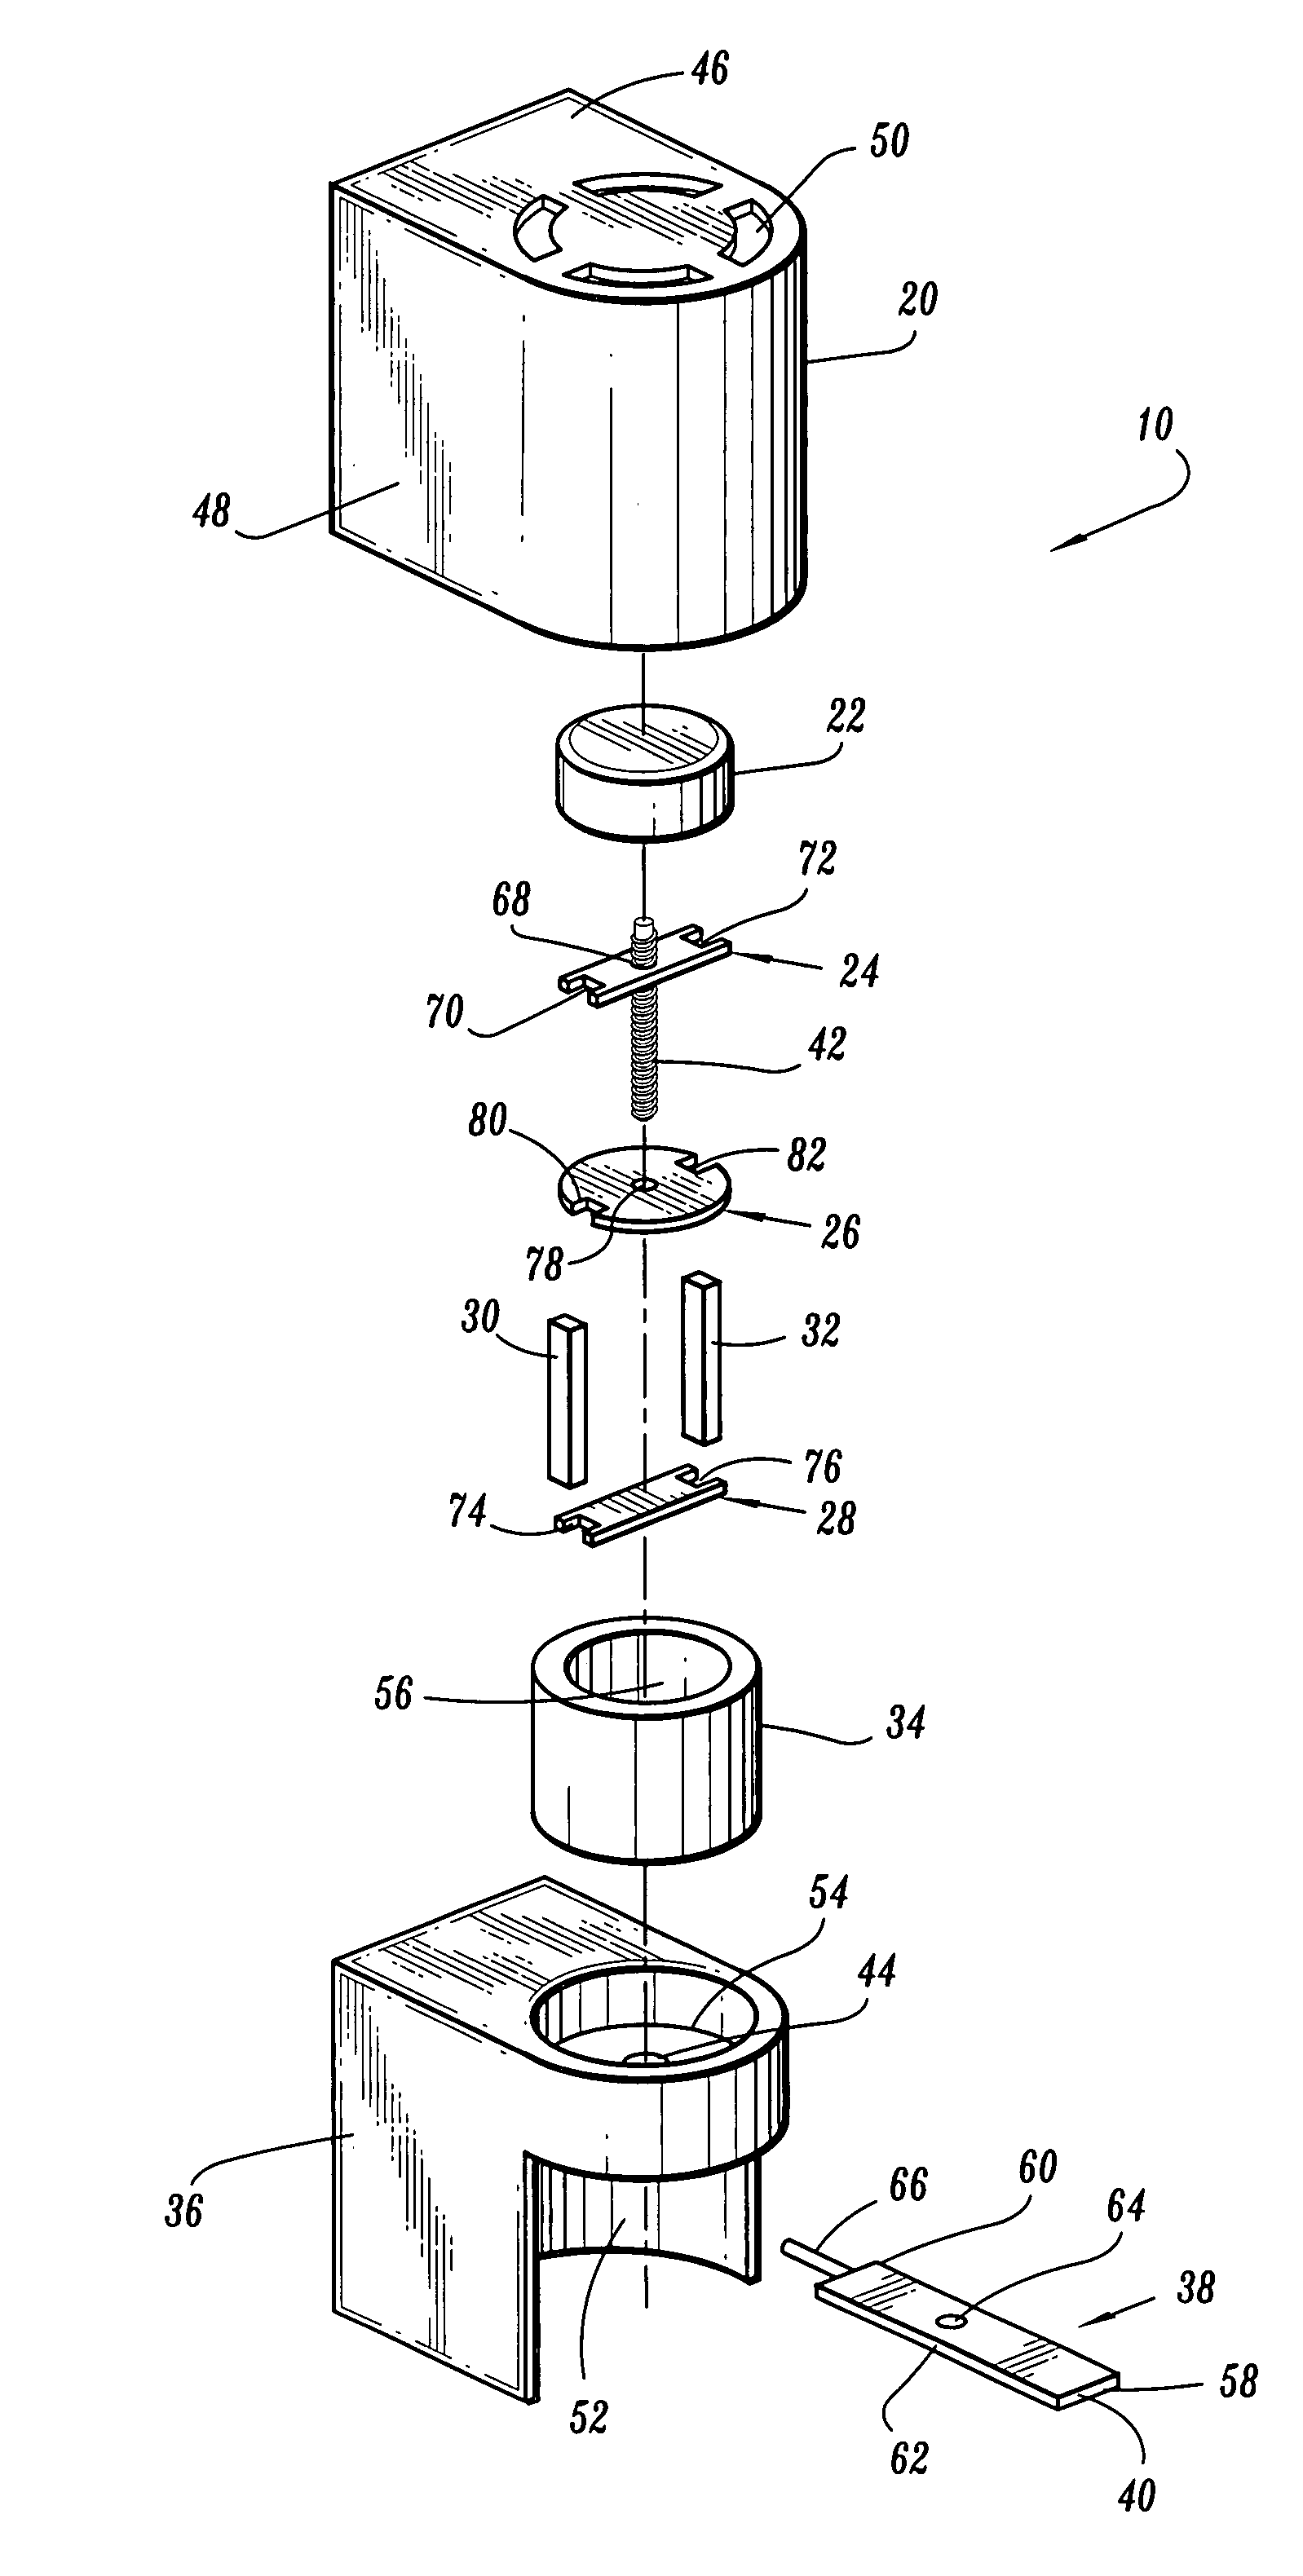 Apparatus for making ice cream having an improved dispenser